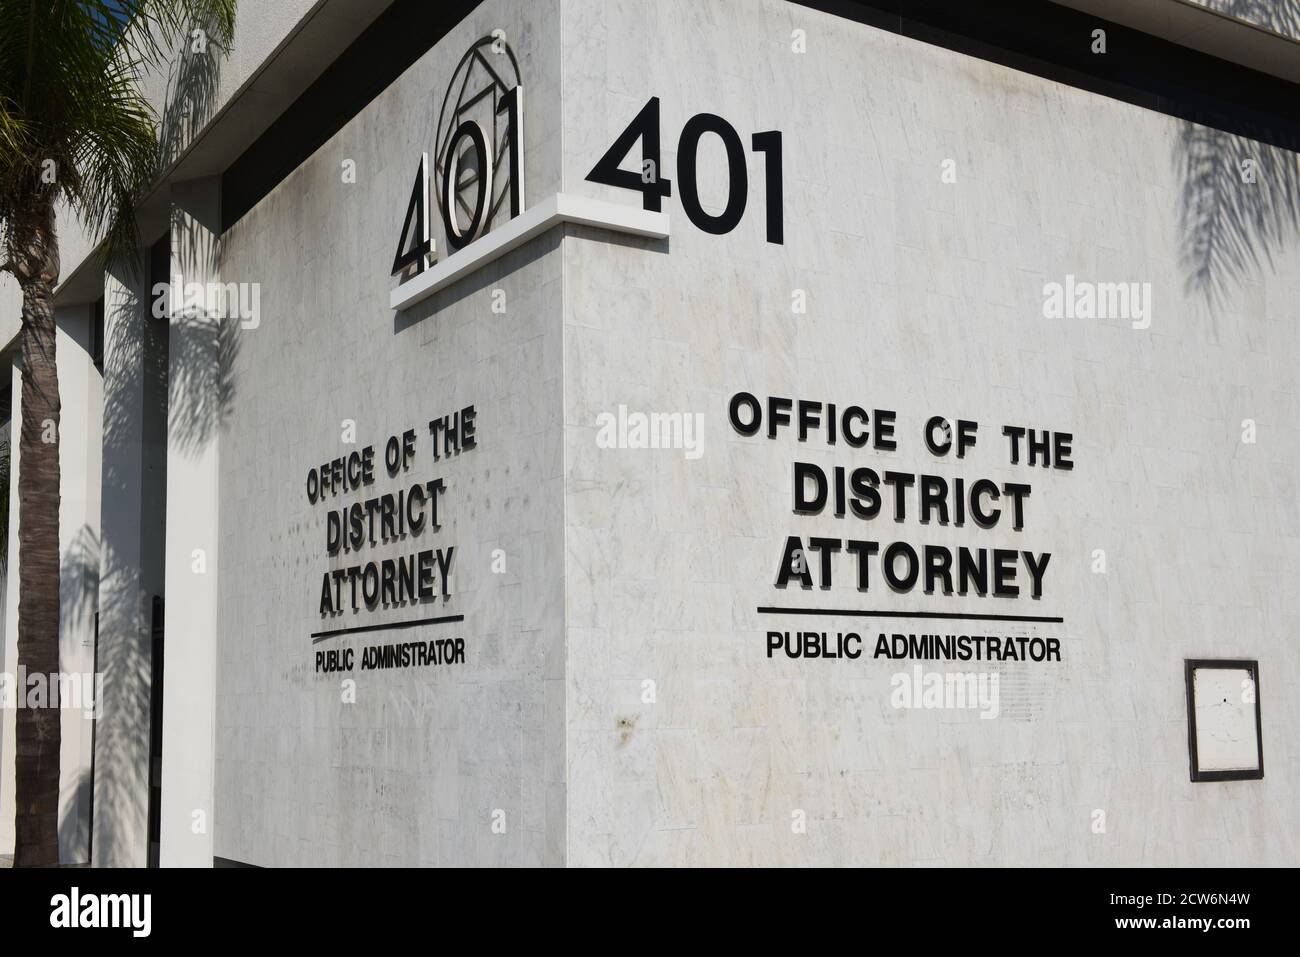 SANTA ANA, CALIFORNIA - 23 SEPT 2020: Sign on the corner of the  Office of the District Attorney, in Santa Ana. Stock Photo